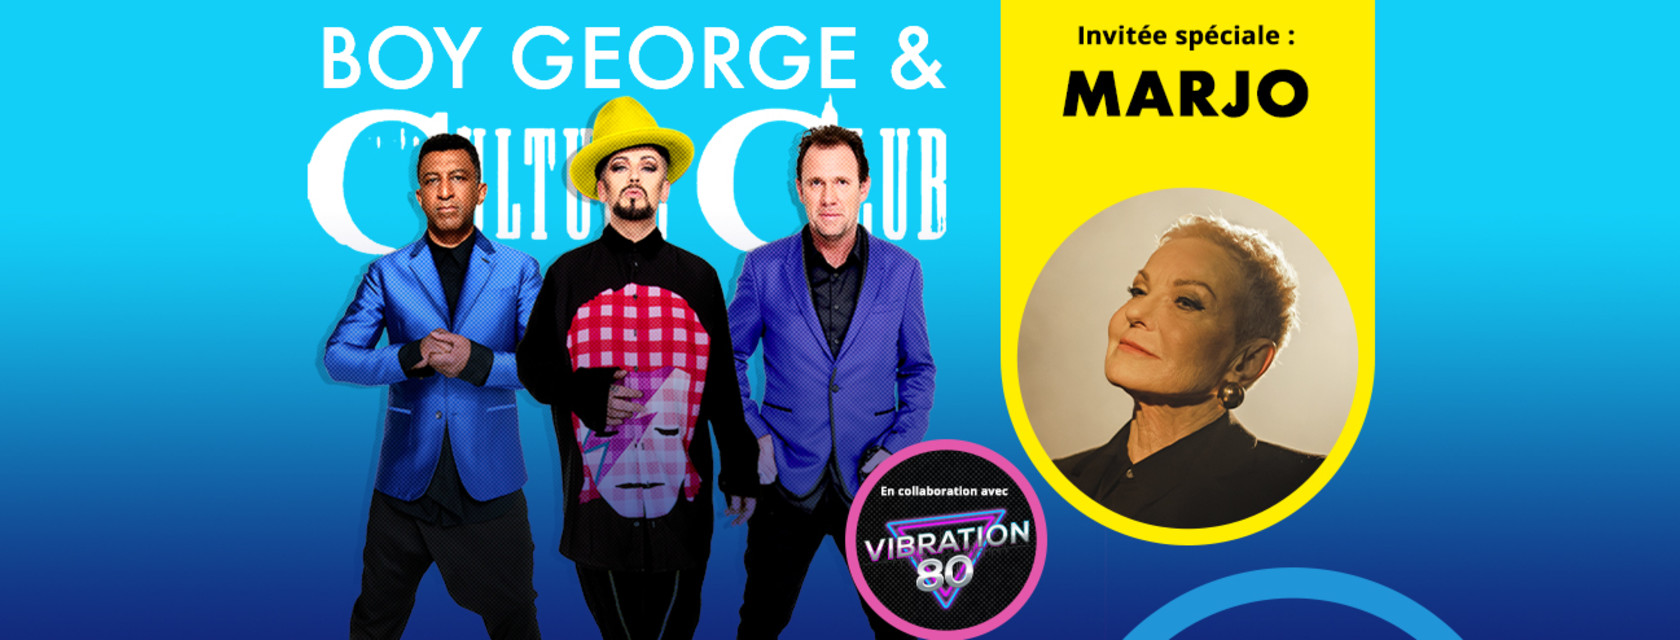 Addition of a special guest for the Boy George & Culture Club show at the Cogeco Amphitheatre!